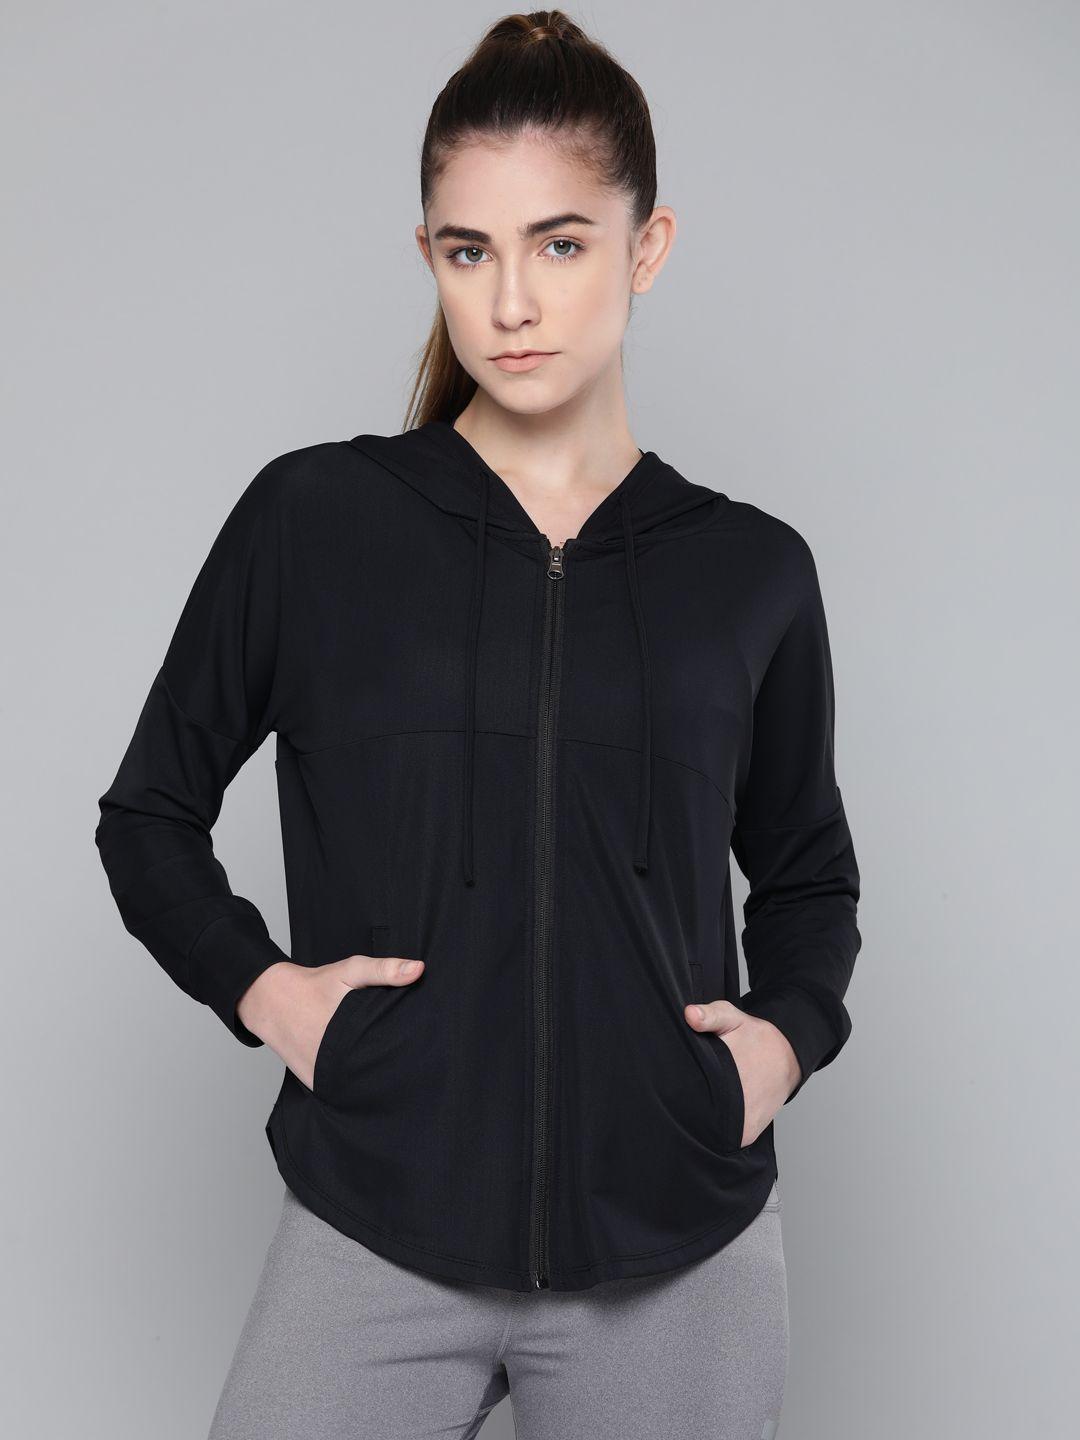 fitkin women black solid lightweight hooded training jacket